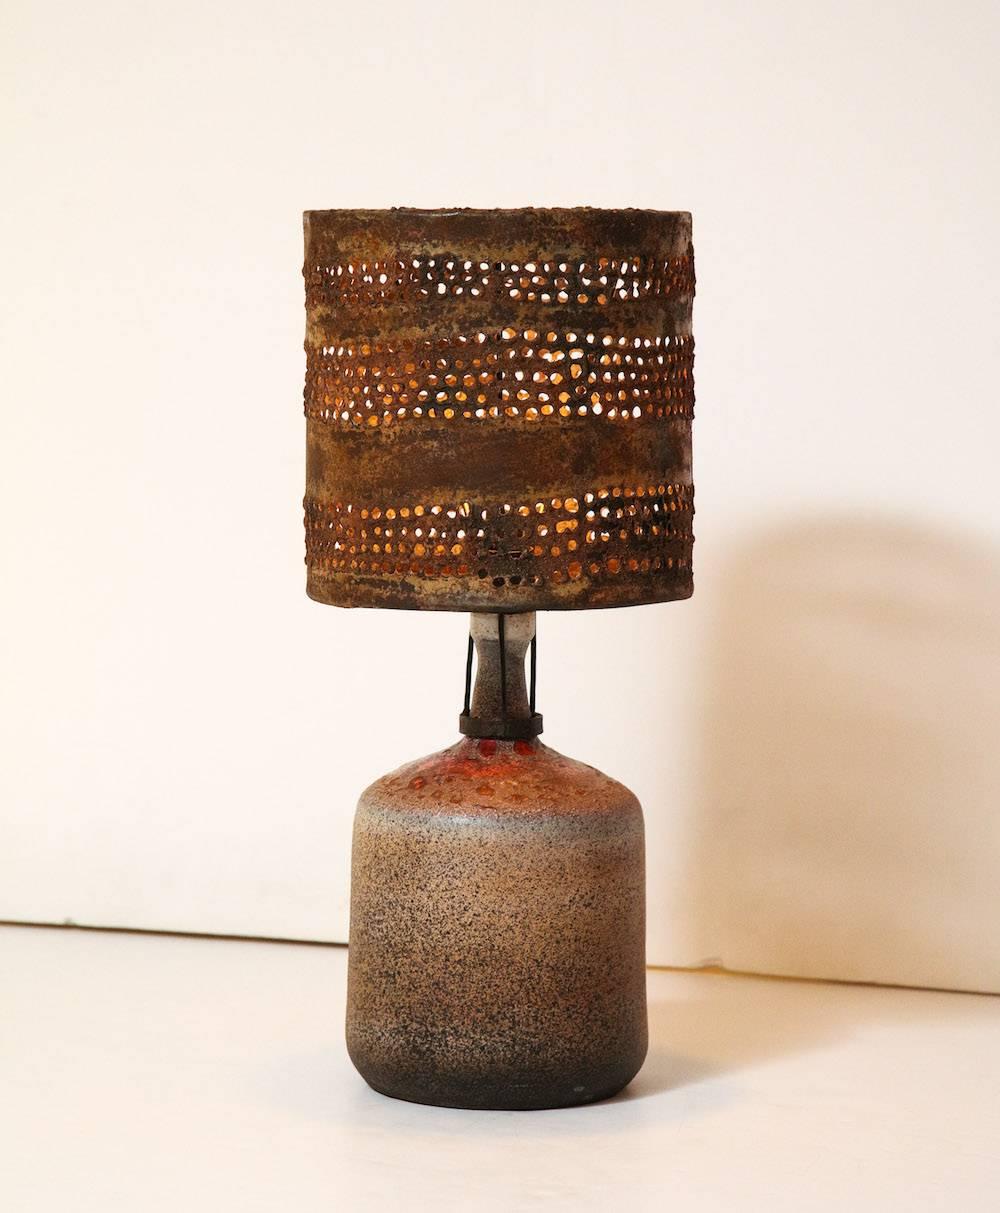 Brutalist table lamp by Gavino Tilocca.
Unique studio-built ceramic lamp with bubble glazes in sand tones with spots of orange. Custom metal shade with cut-outs, and eroded surface. An incredible example of Tilocca's ceramic and metal work.